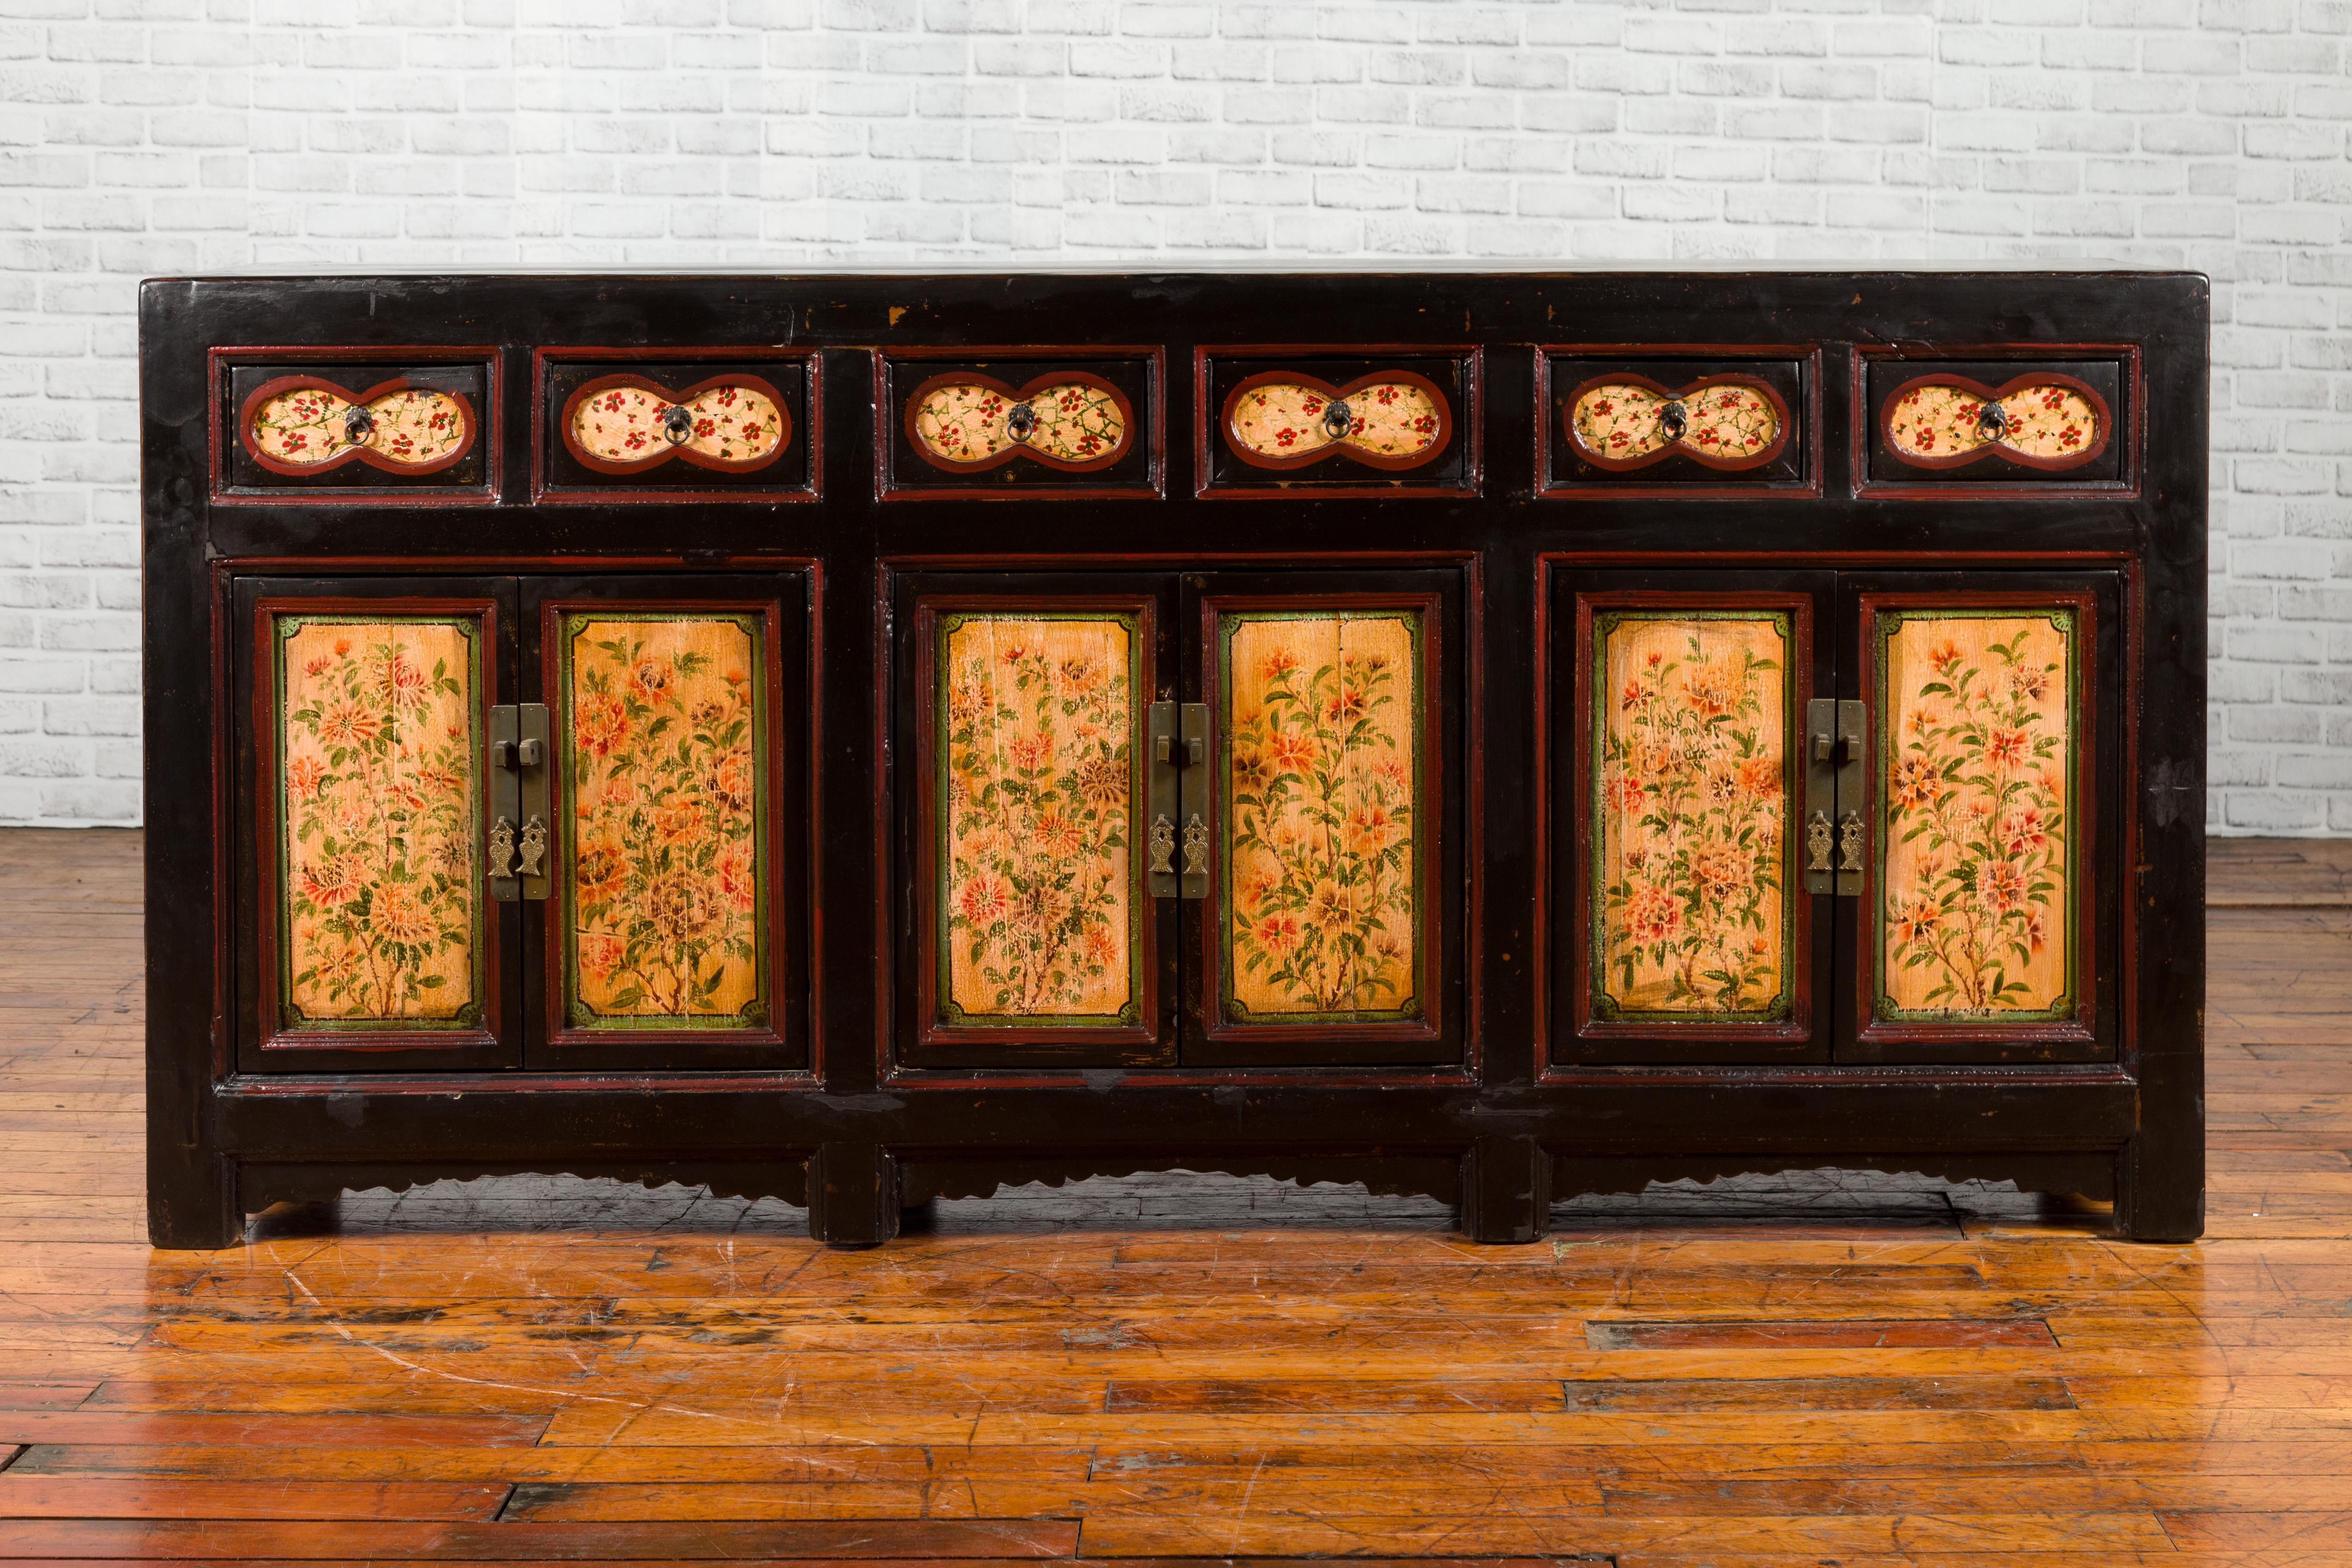 A Chinese black painted Gansu sideboard from the early 20th century, with hand painted floral motifs. Created in the North-Center province of China, called Gansu during the early years of the 20th century, this sideboard features an unusual black